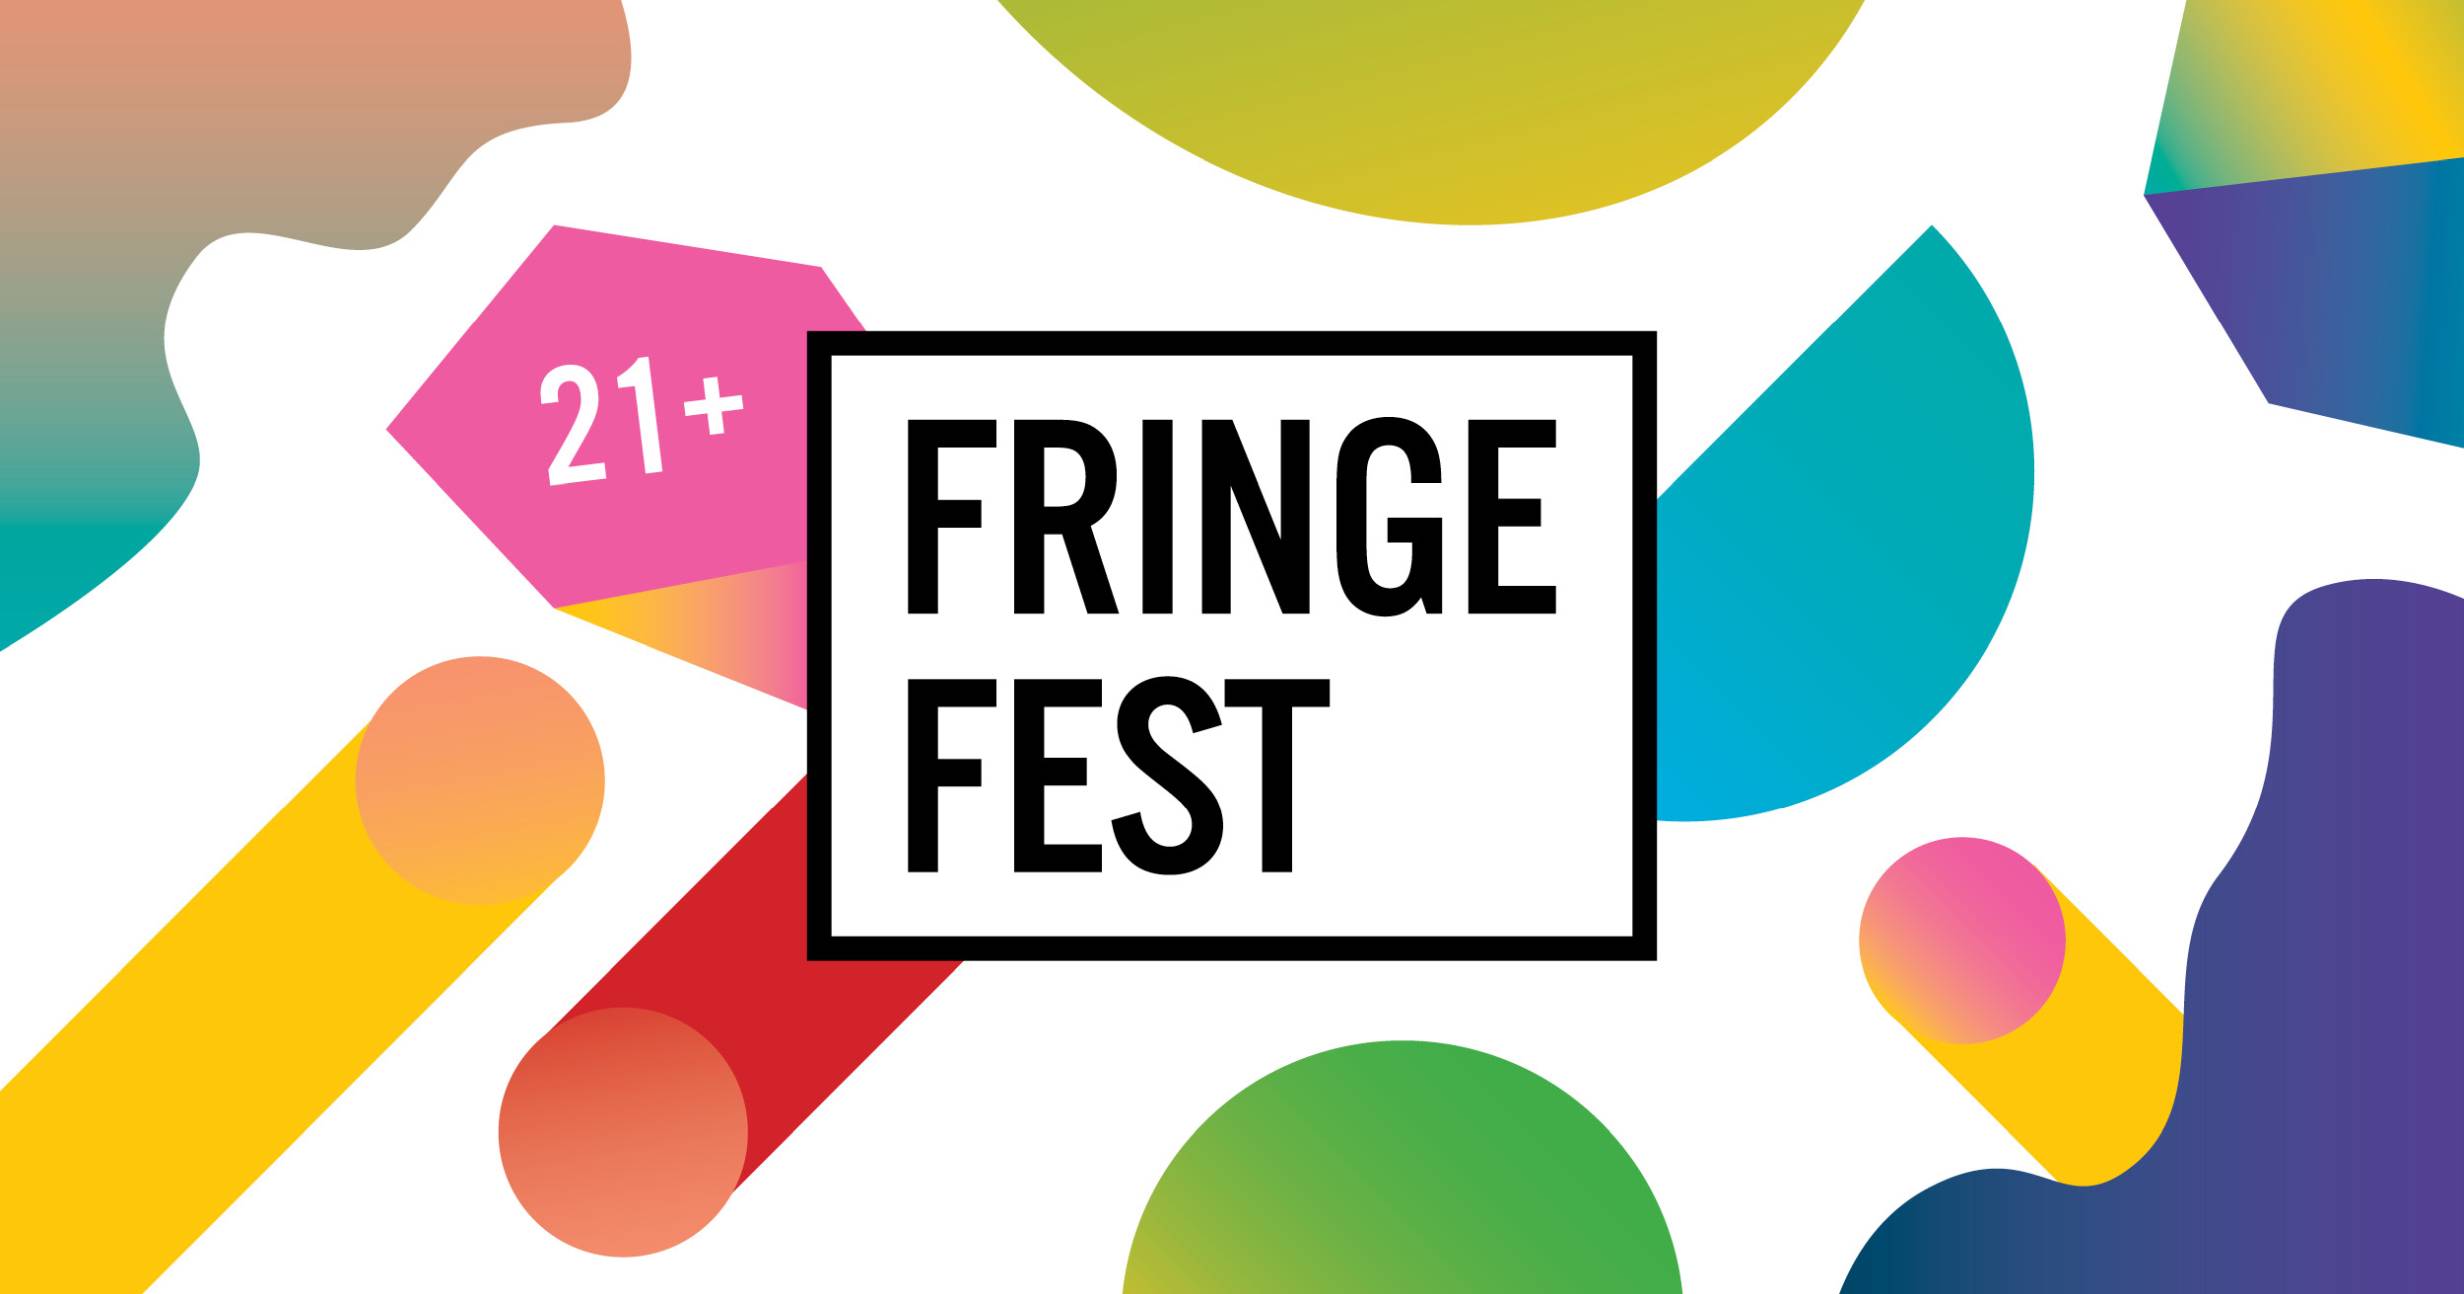 Fringe Fest: A must-see event for local music